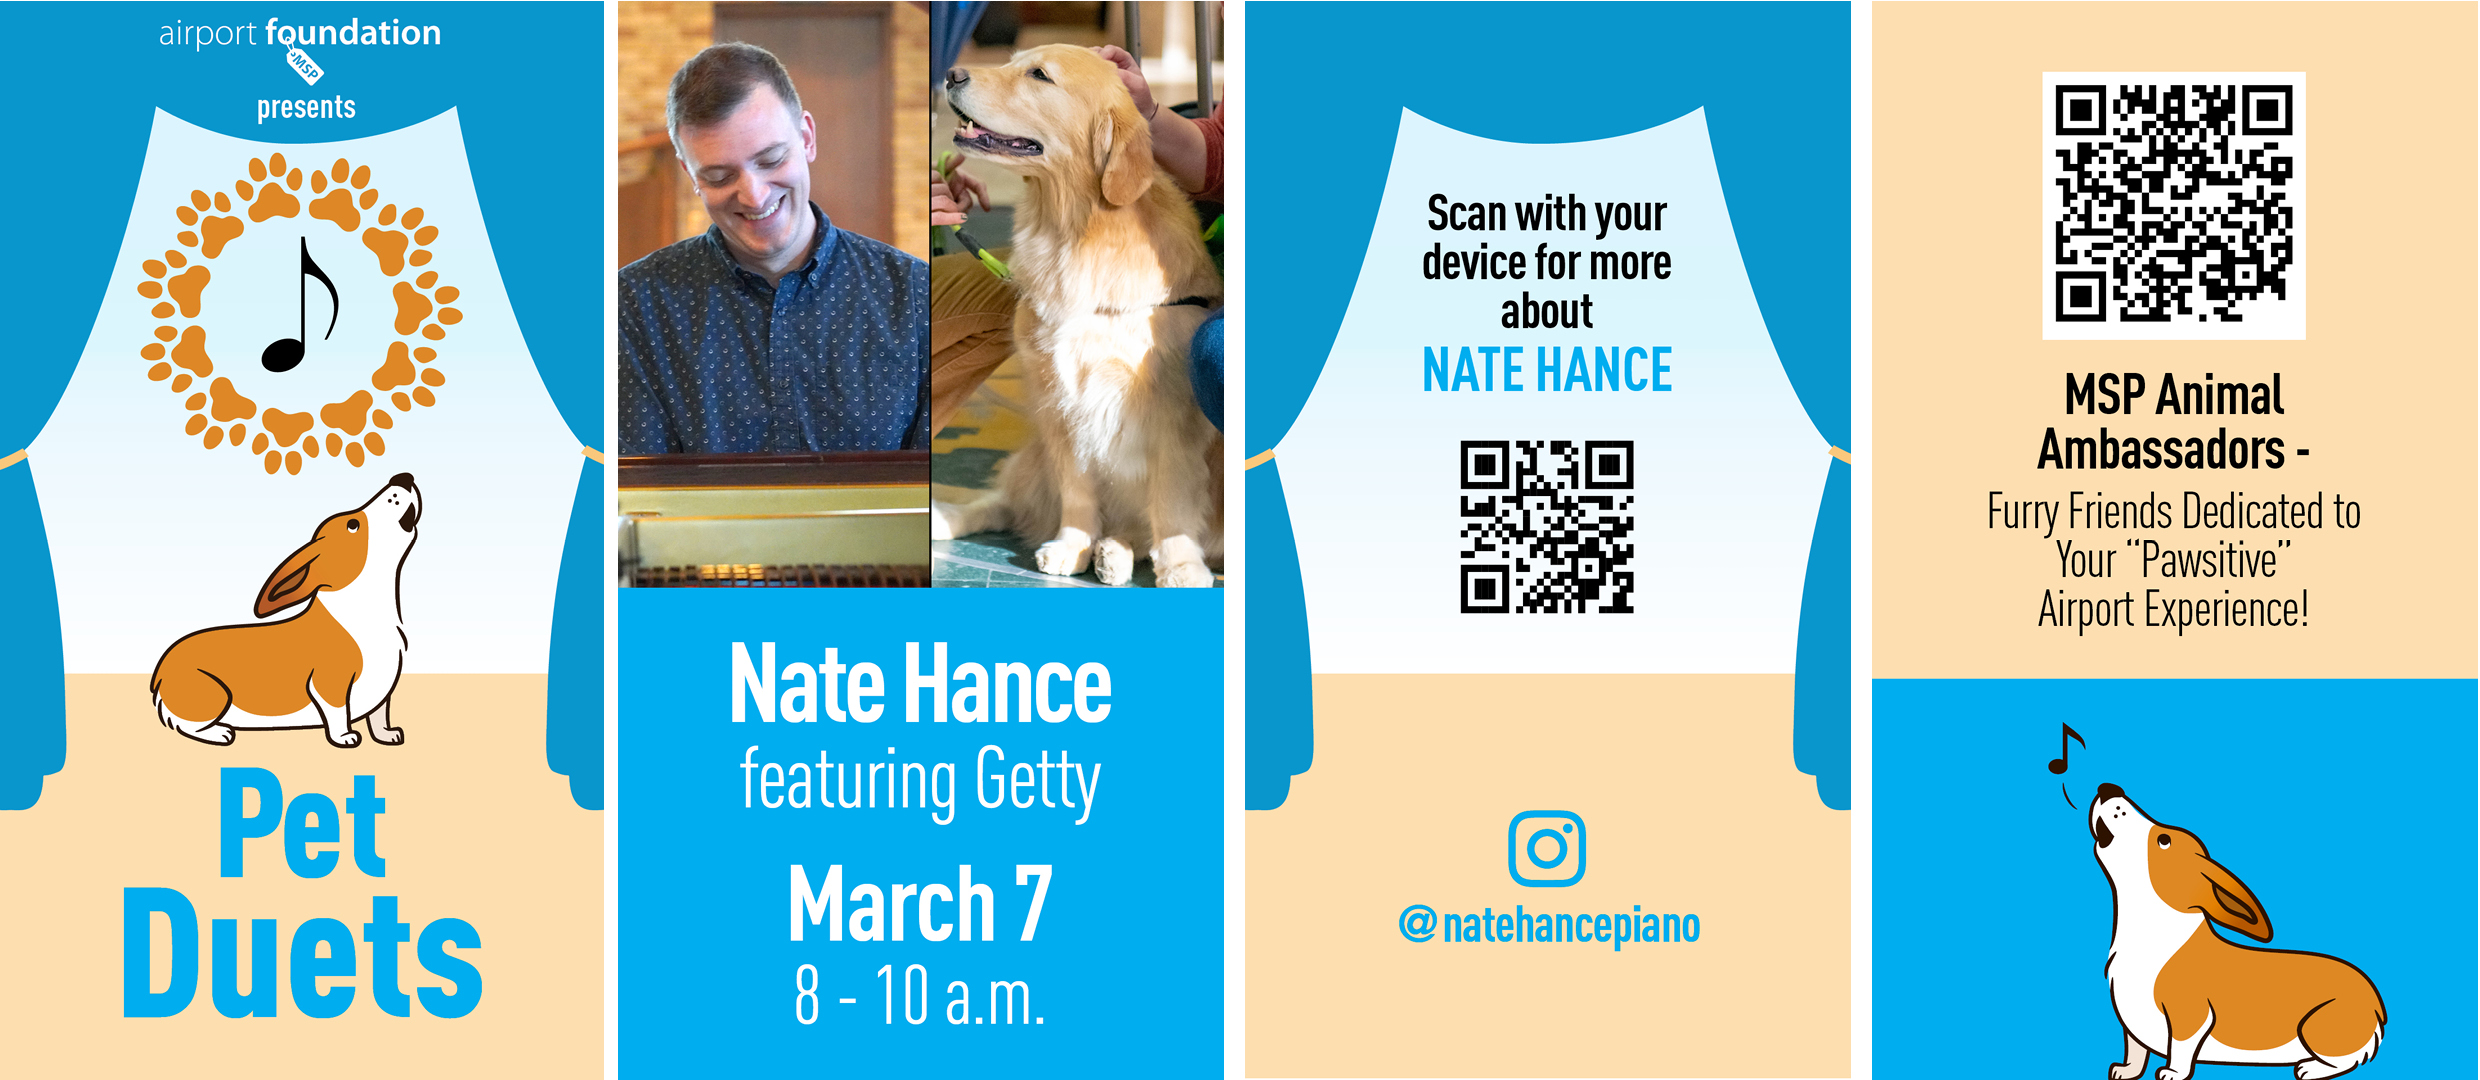 Pet Duets! with Nate Hance feat. Getty